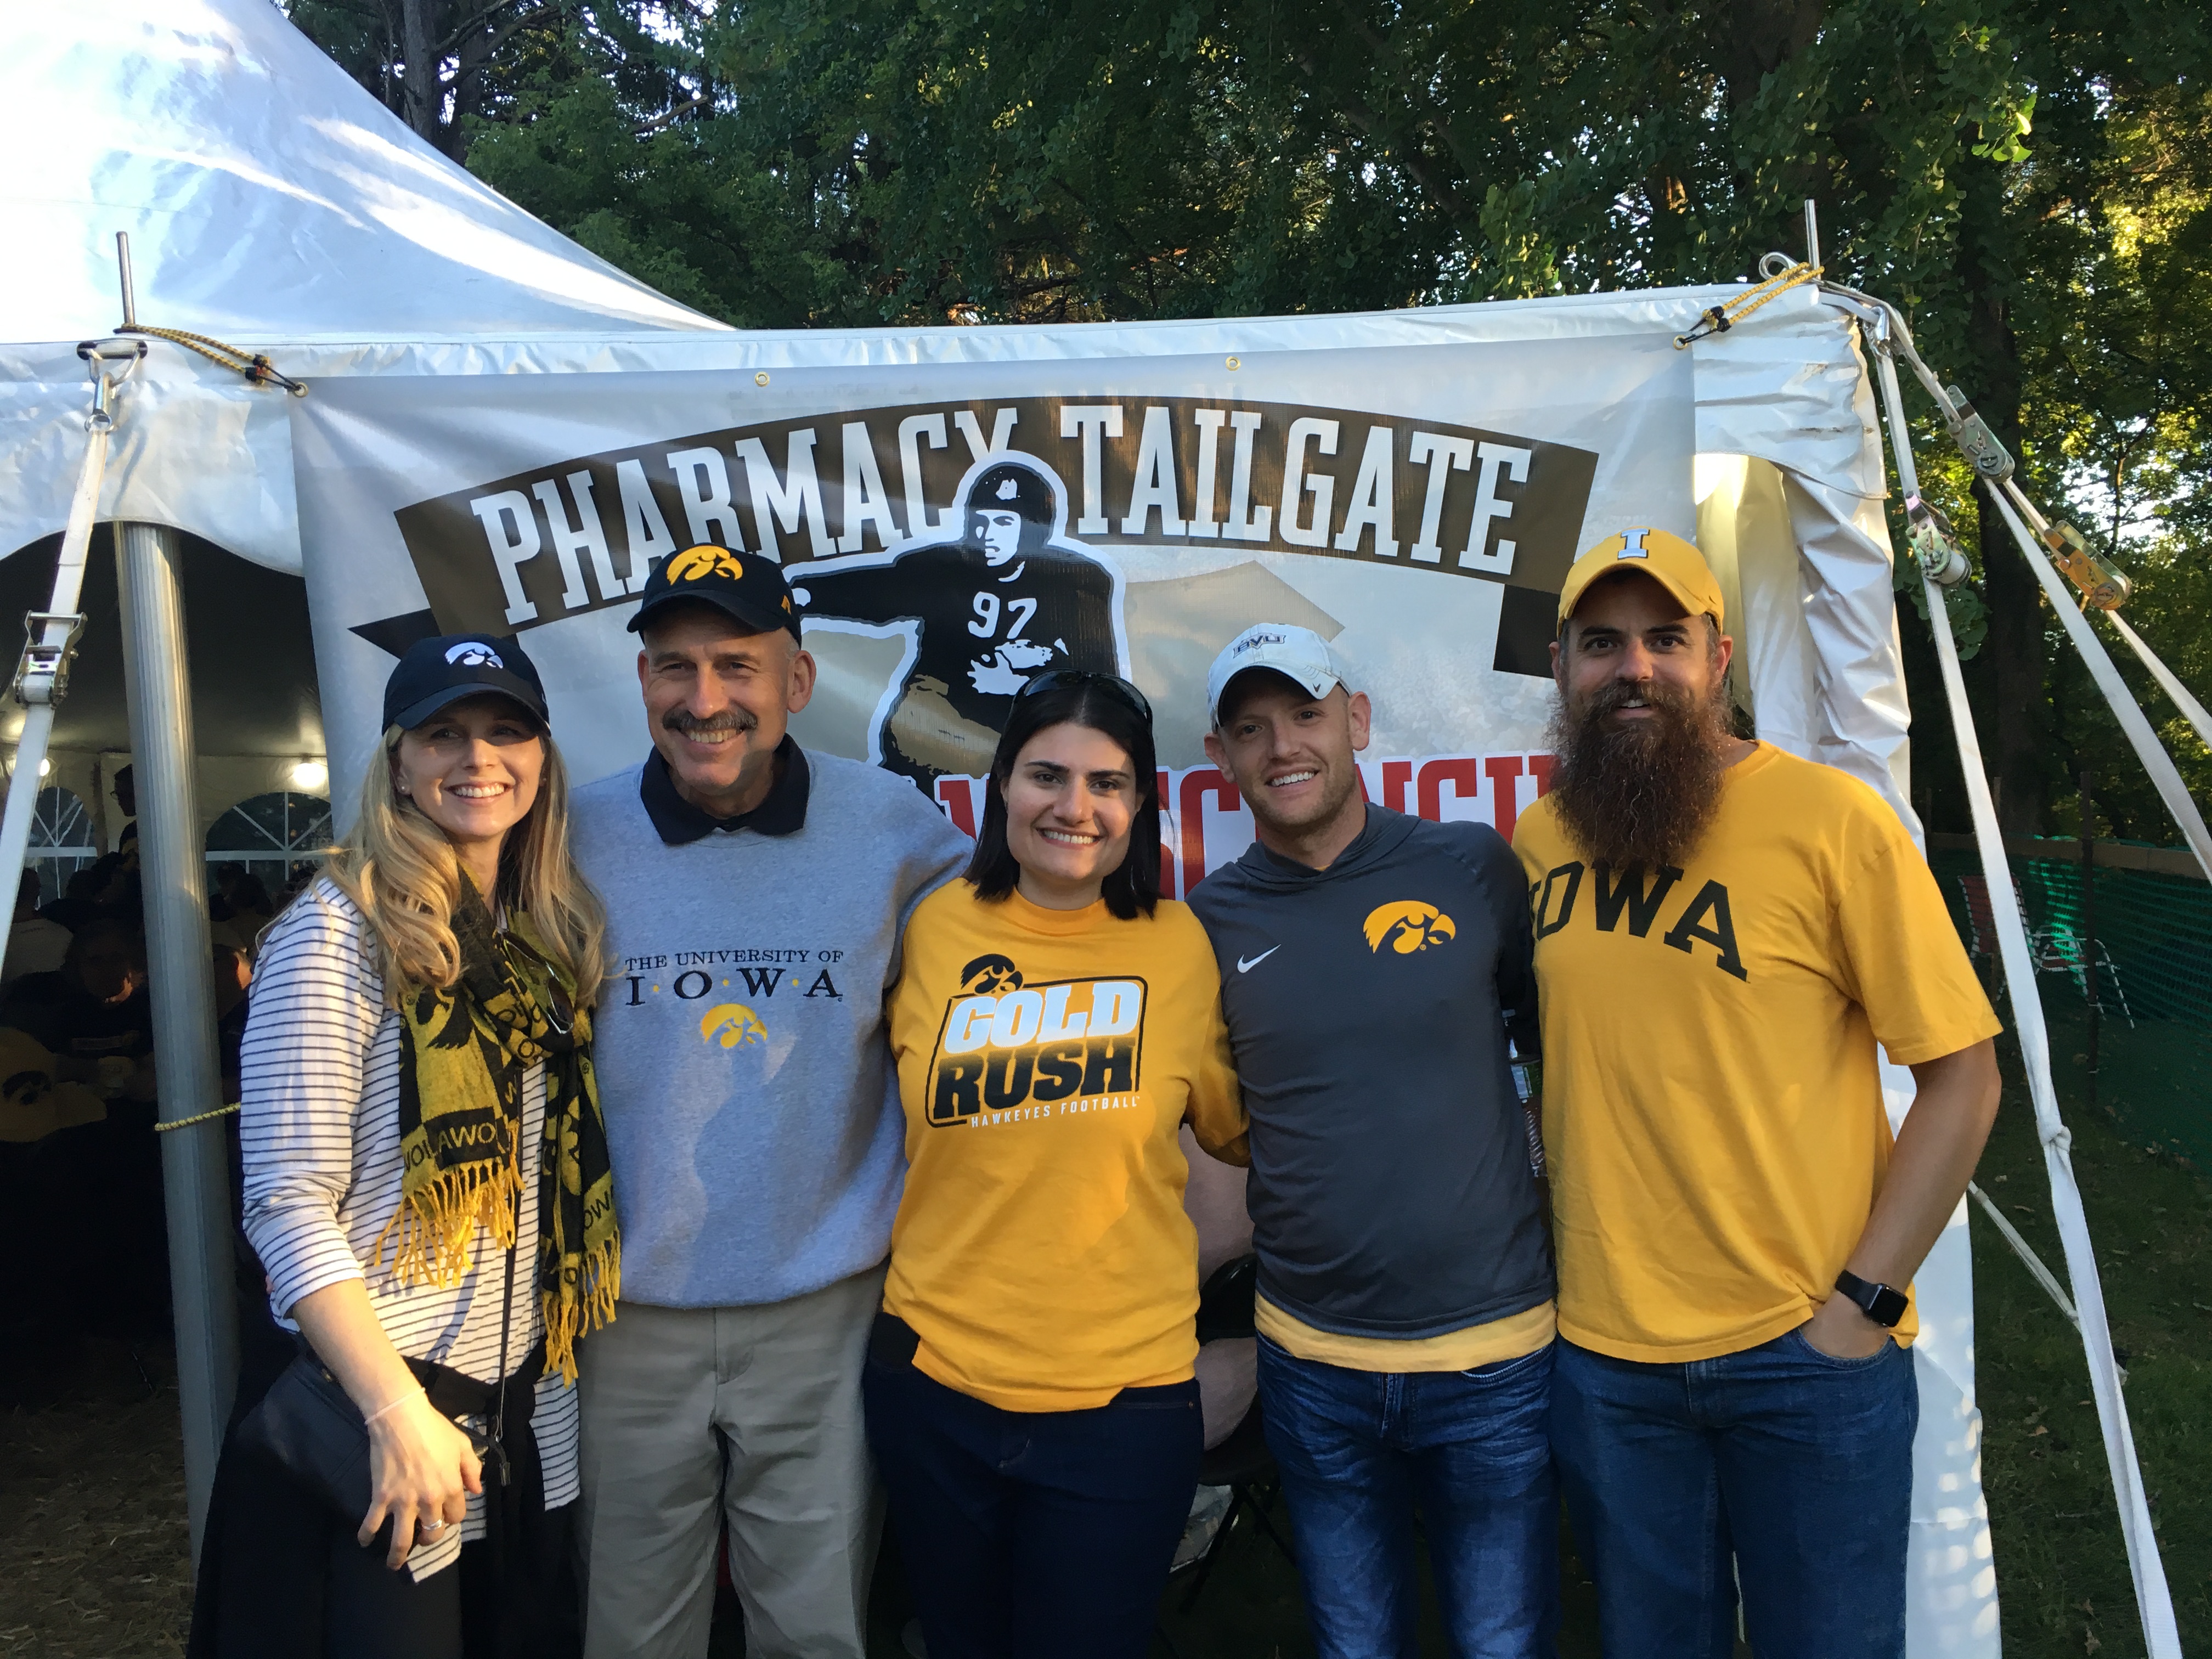 College of Pharmacy Alumni, Family and Friends Tailgate